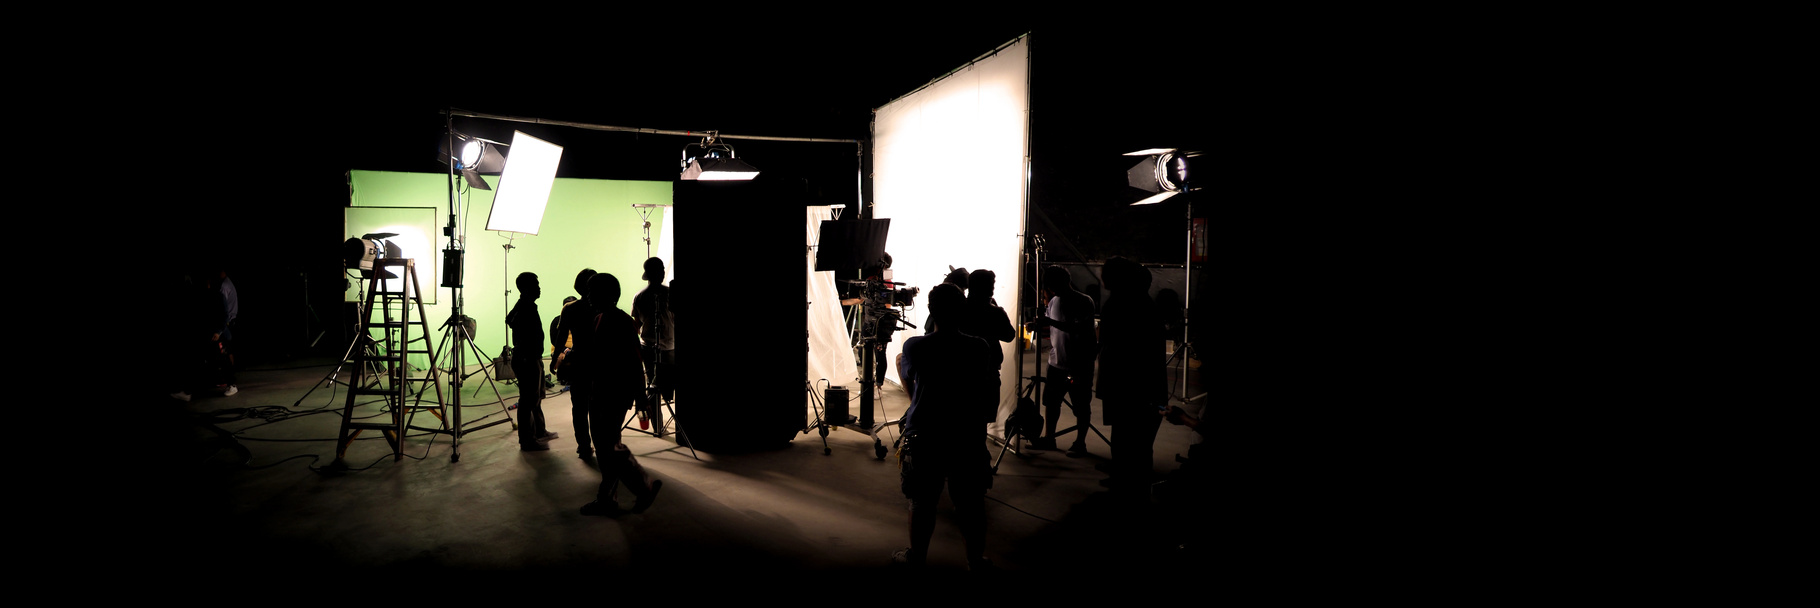 Silhouette of a Filming Production Studio Set